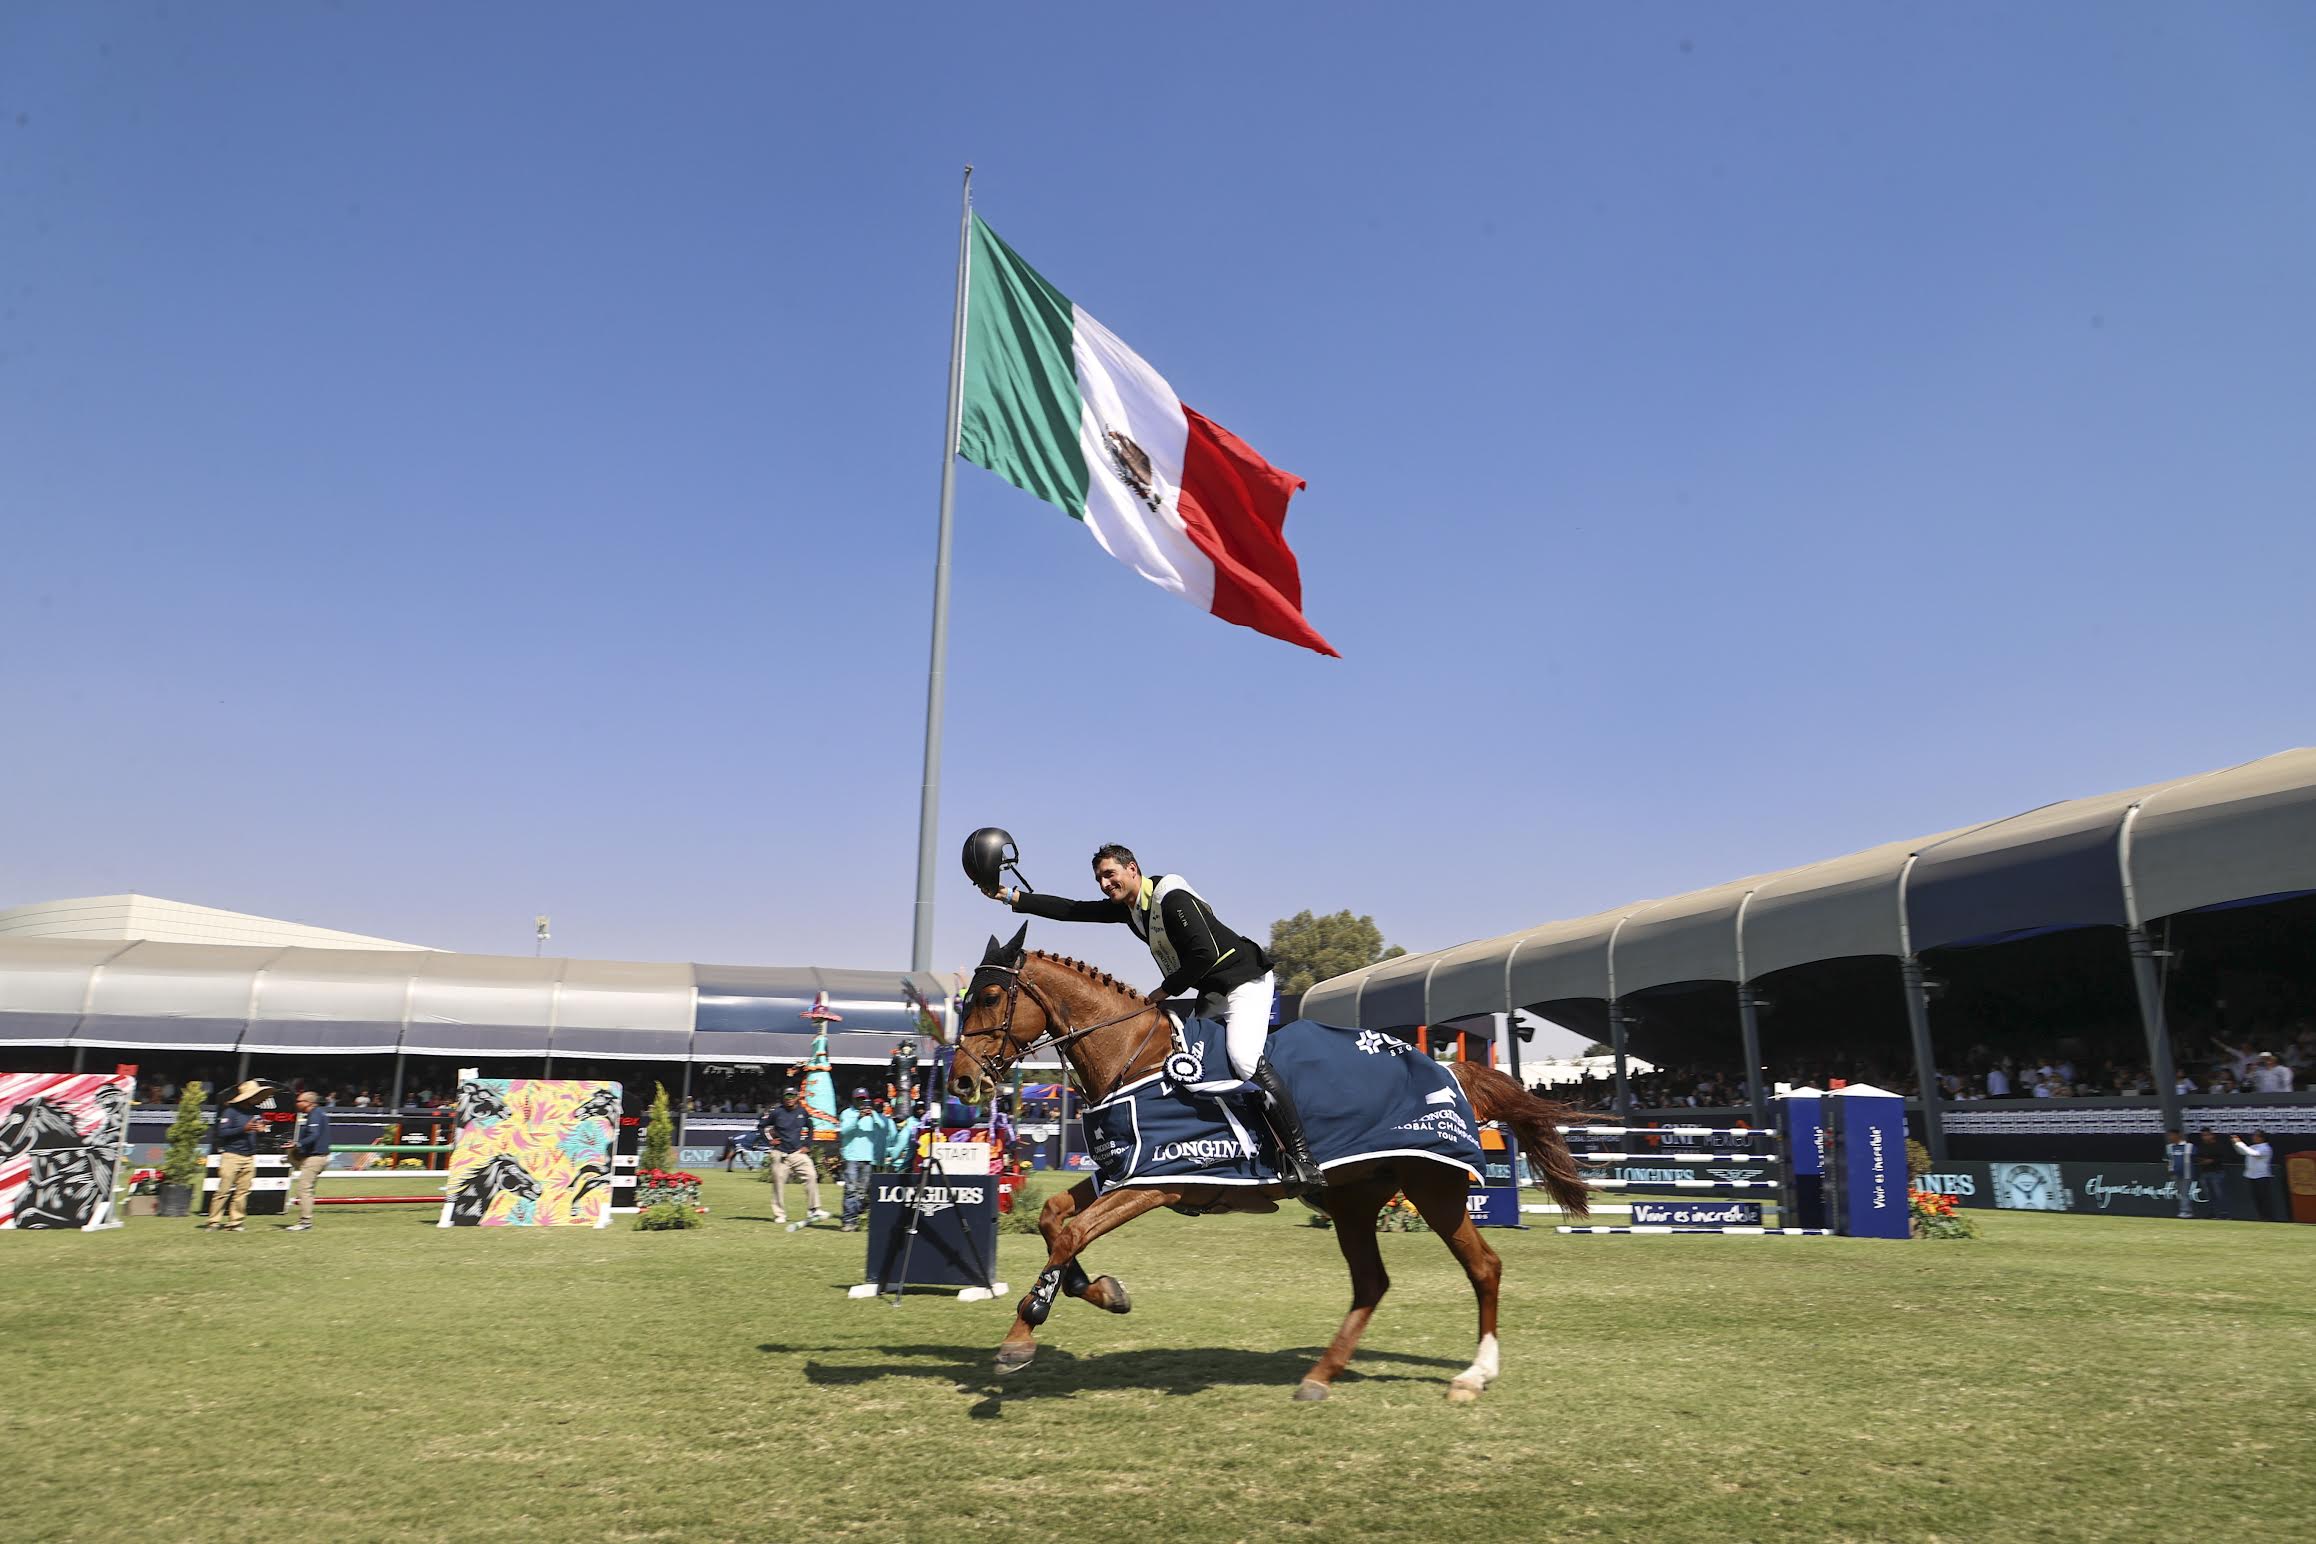 Nicola Philippaerts: "Mexico is a colorful spectacle!"